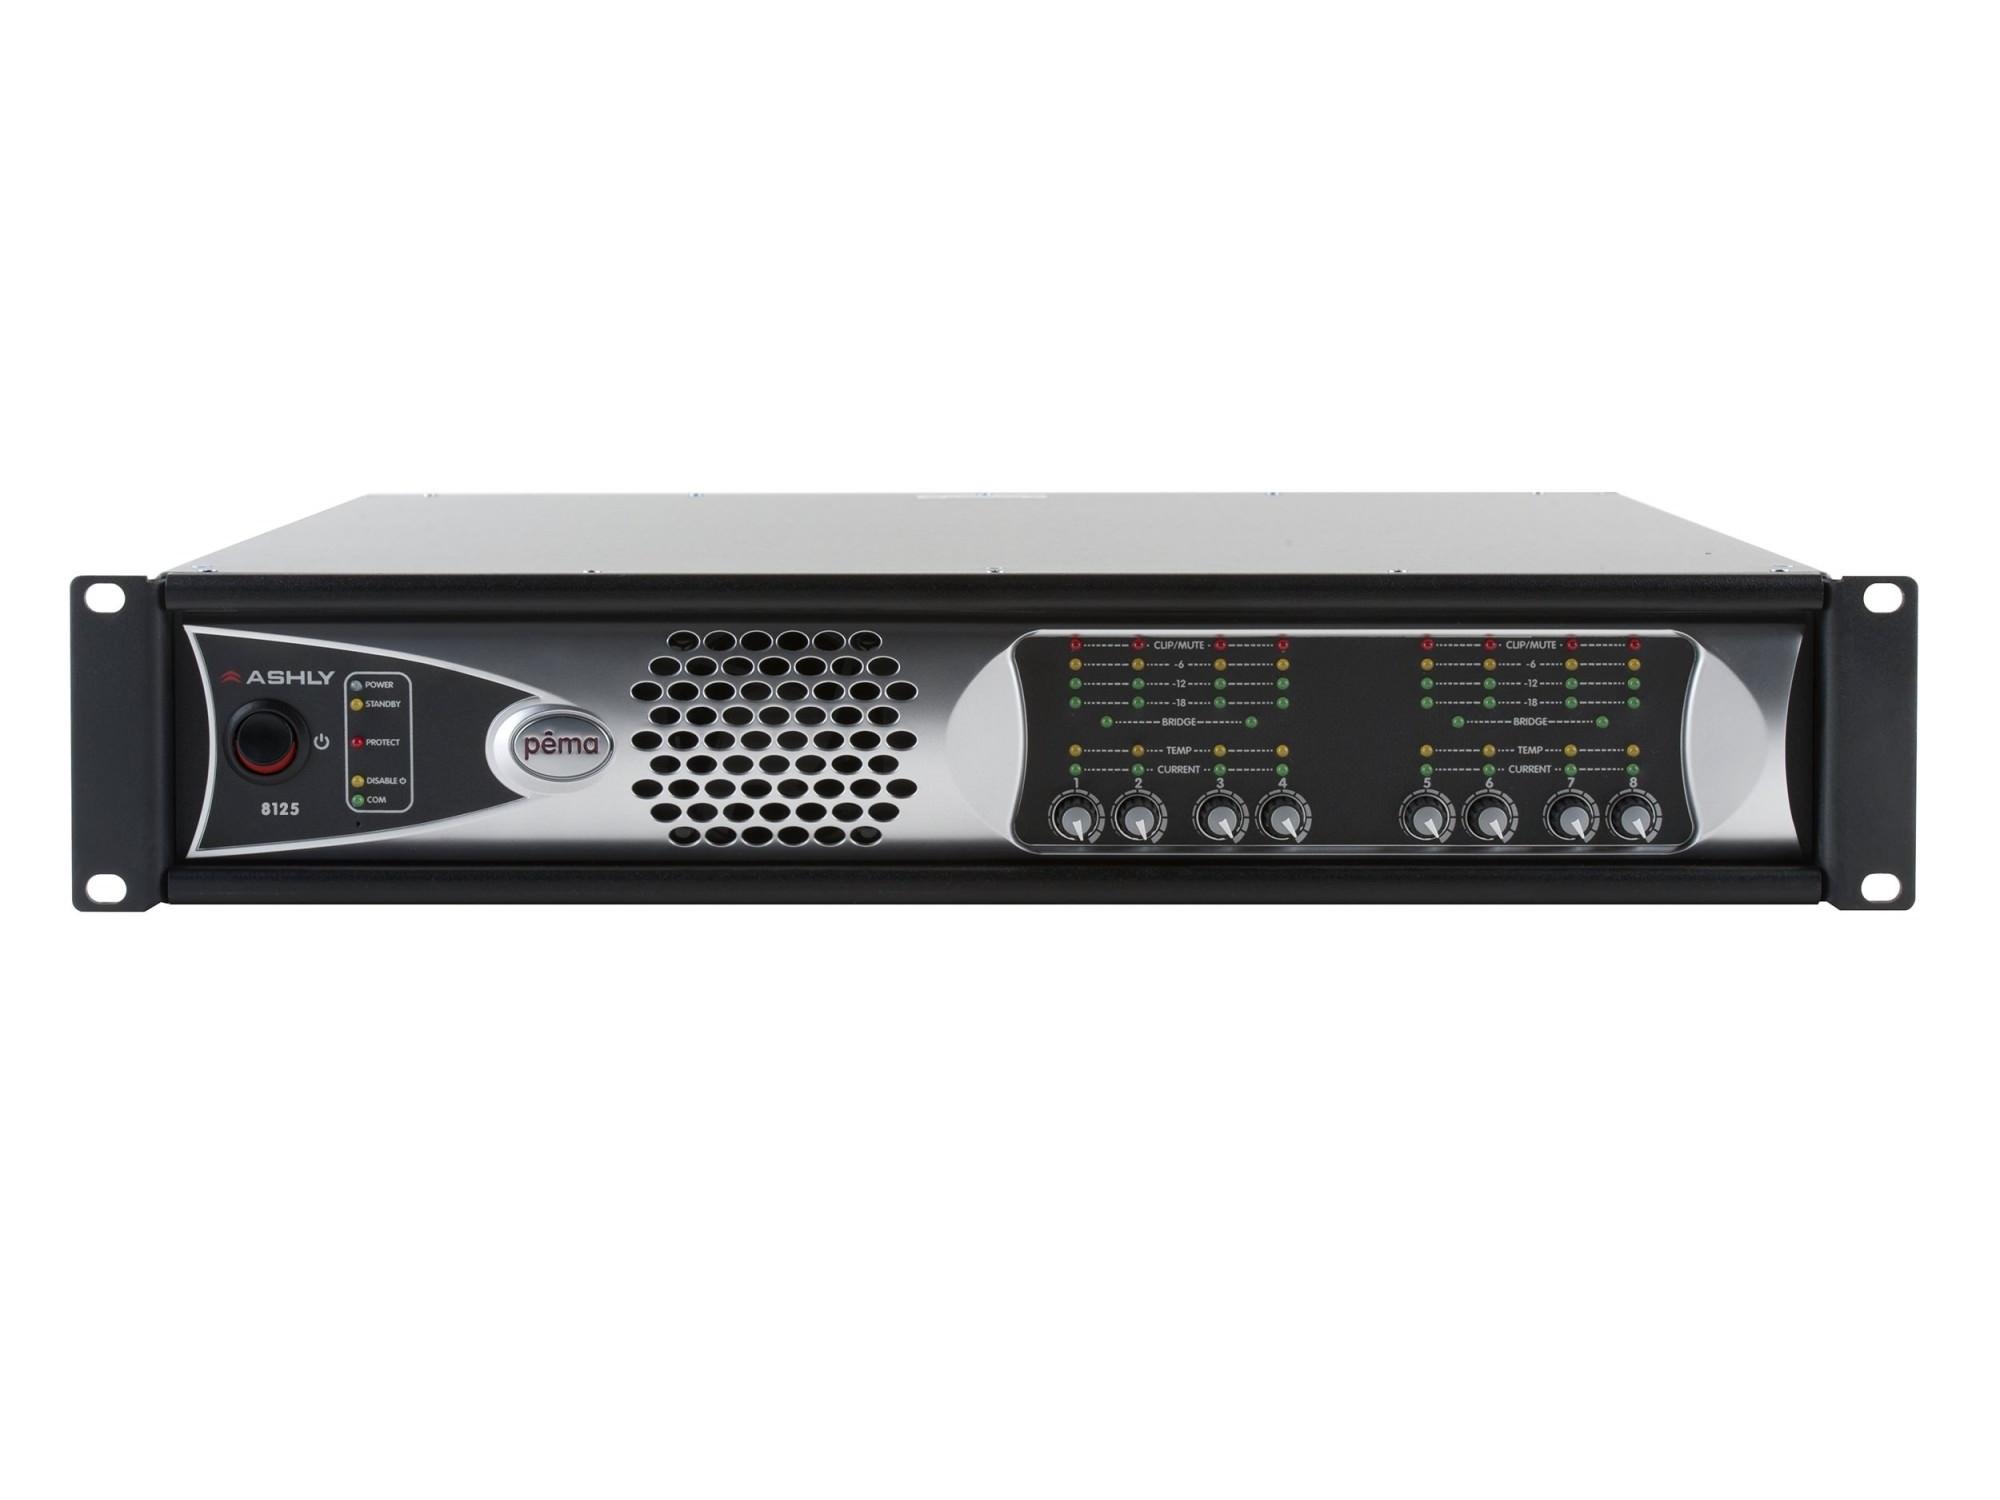 pema 8125.70 8 x 125W/70V Pema Network Power Amplifier/Constant Voltage with 8x8 Protea DSP by Ashly